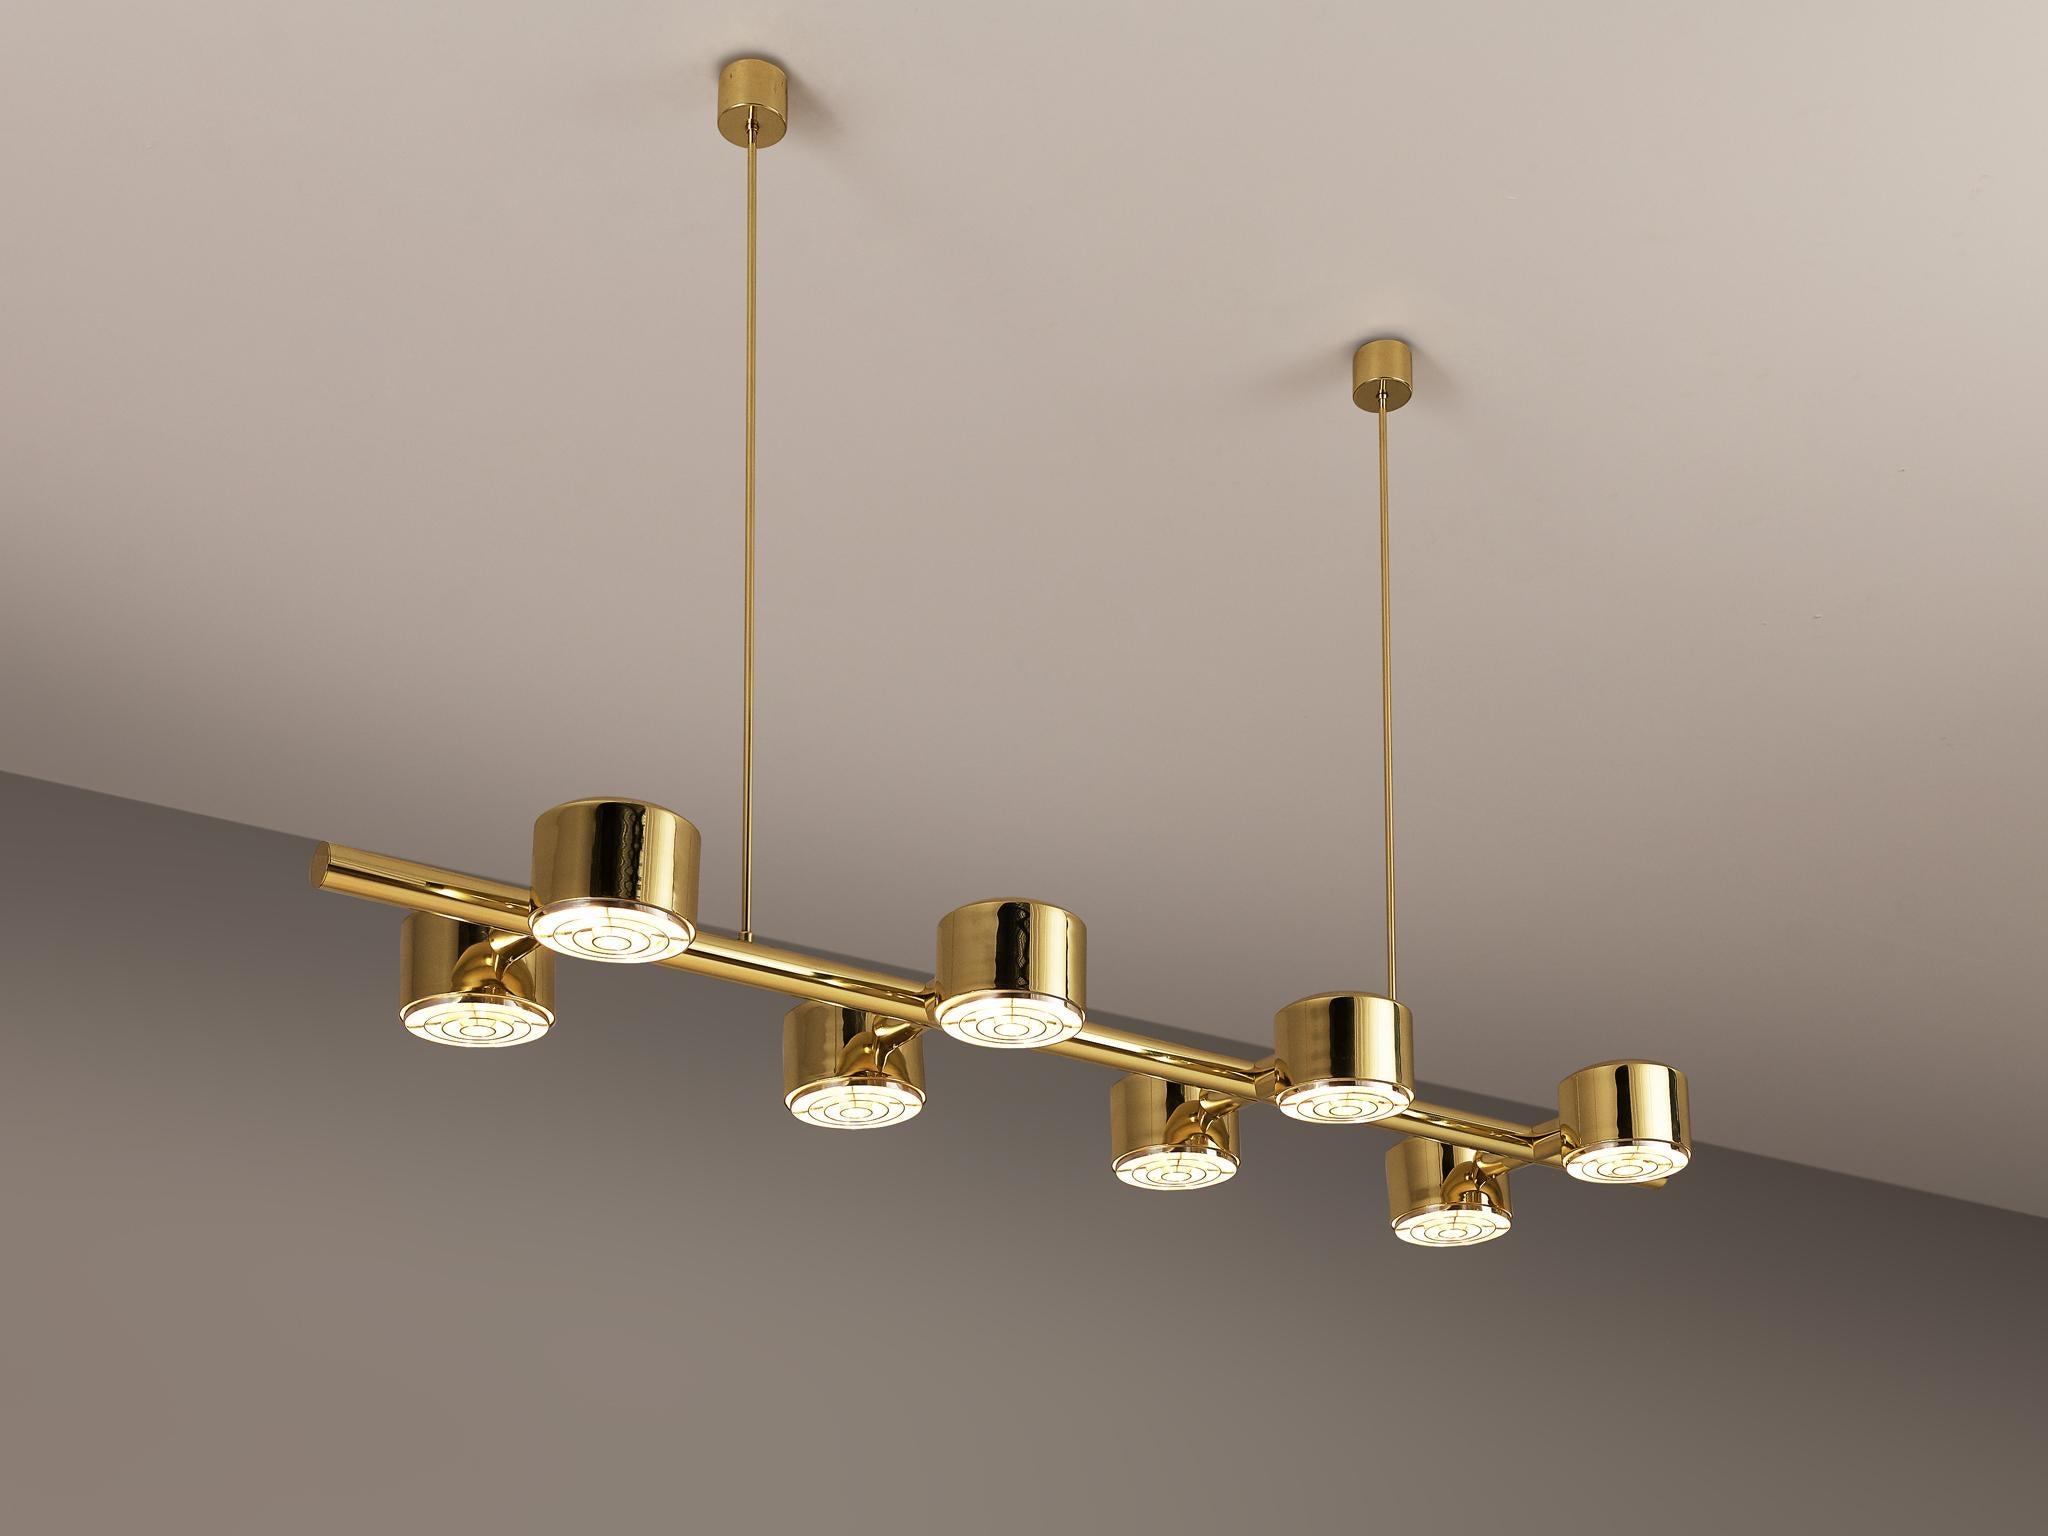 Hans-Agne Jakobsson for Hans-Agne Jakobsson AB in Markaryd, ceiling light, model T 746, brass, Sweden, 1960s 

Hans-Agne Jakobsson designed this large chandelier with eight cylindrical light bulbs paired on a line. The brass reflects the light